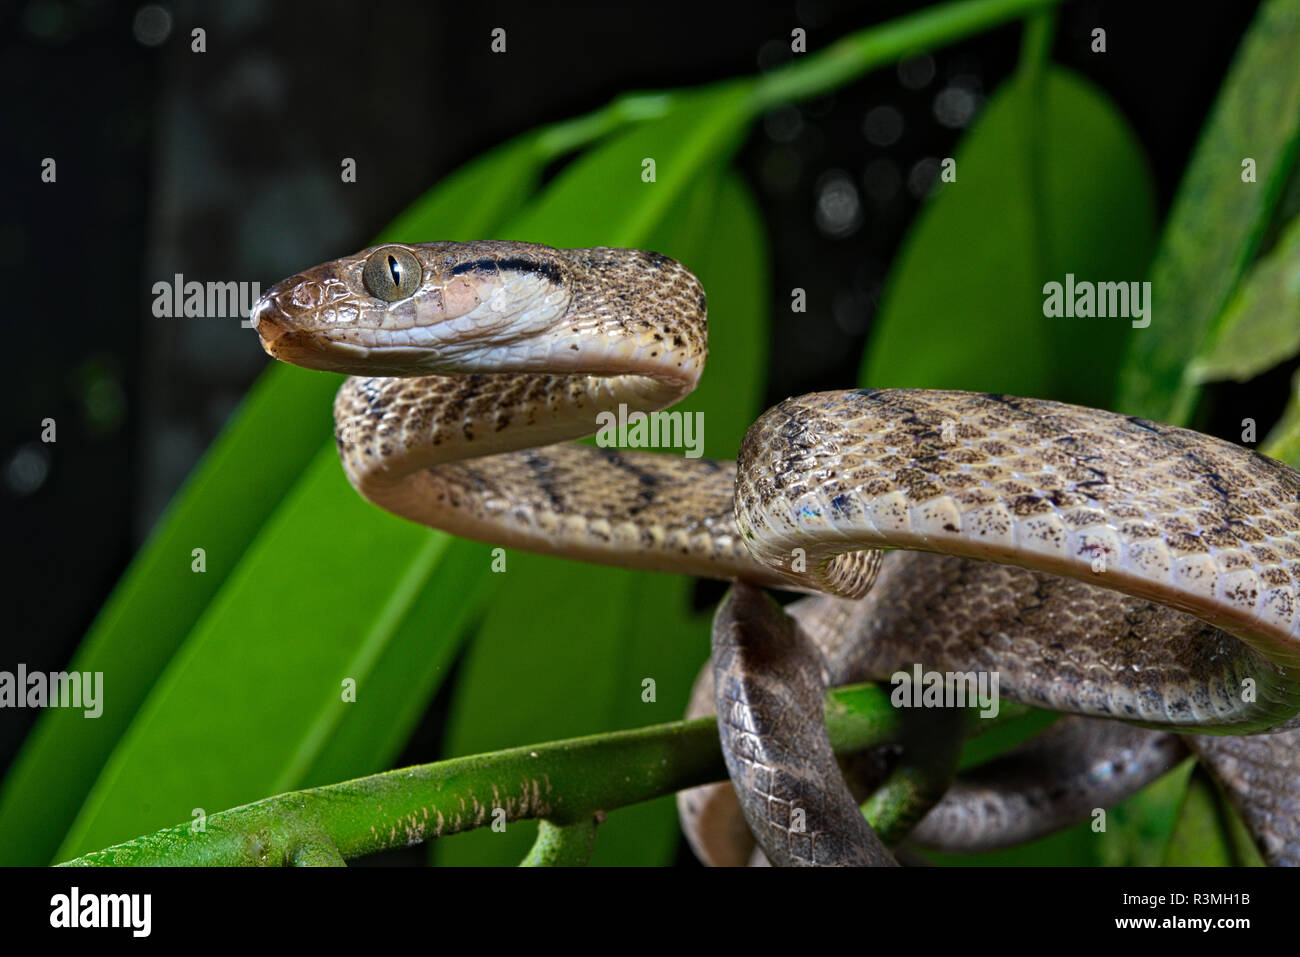 Brown tree snake (Boiga irregularis). This species was introduced on the island of Guam and caused the extinction of several species of birds. Stock Photo